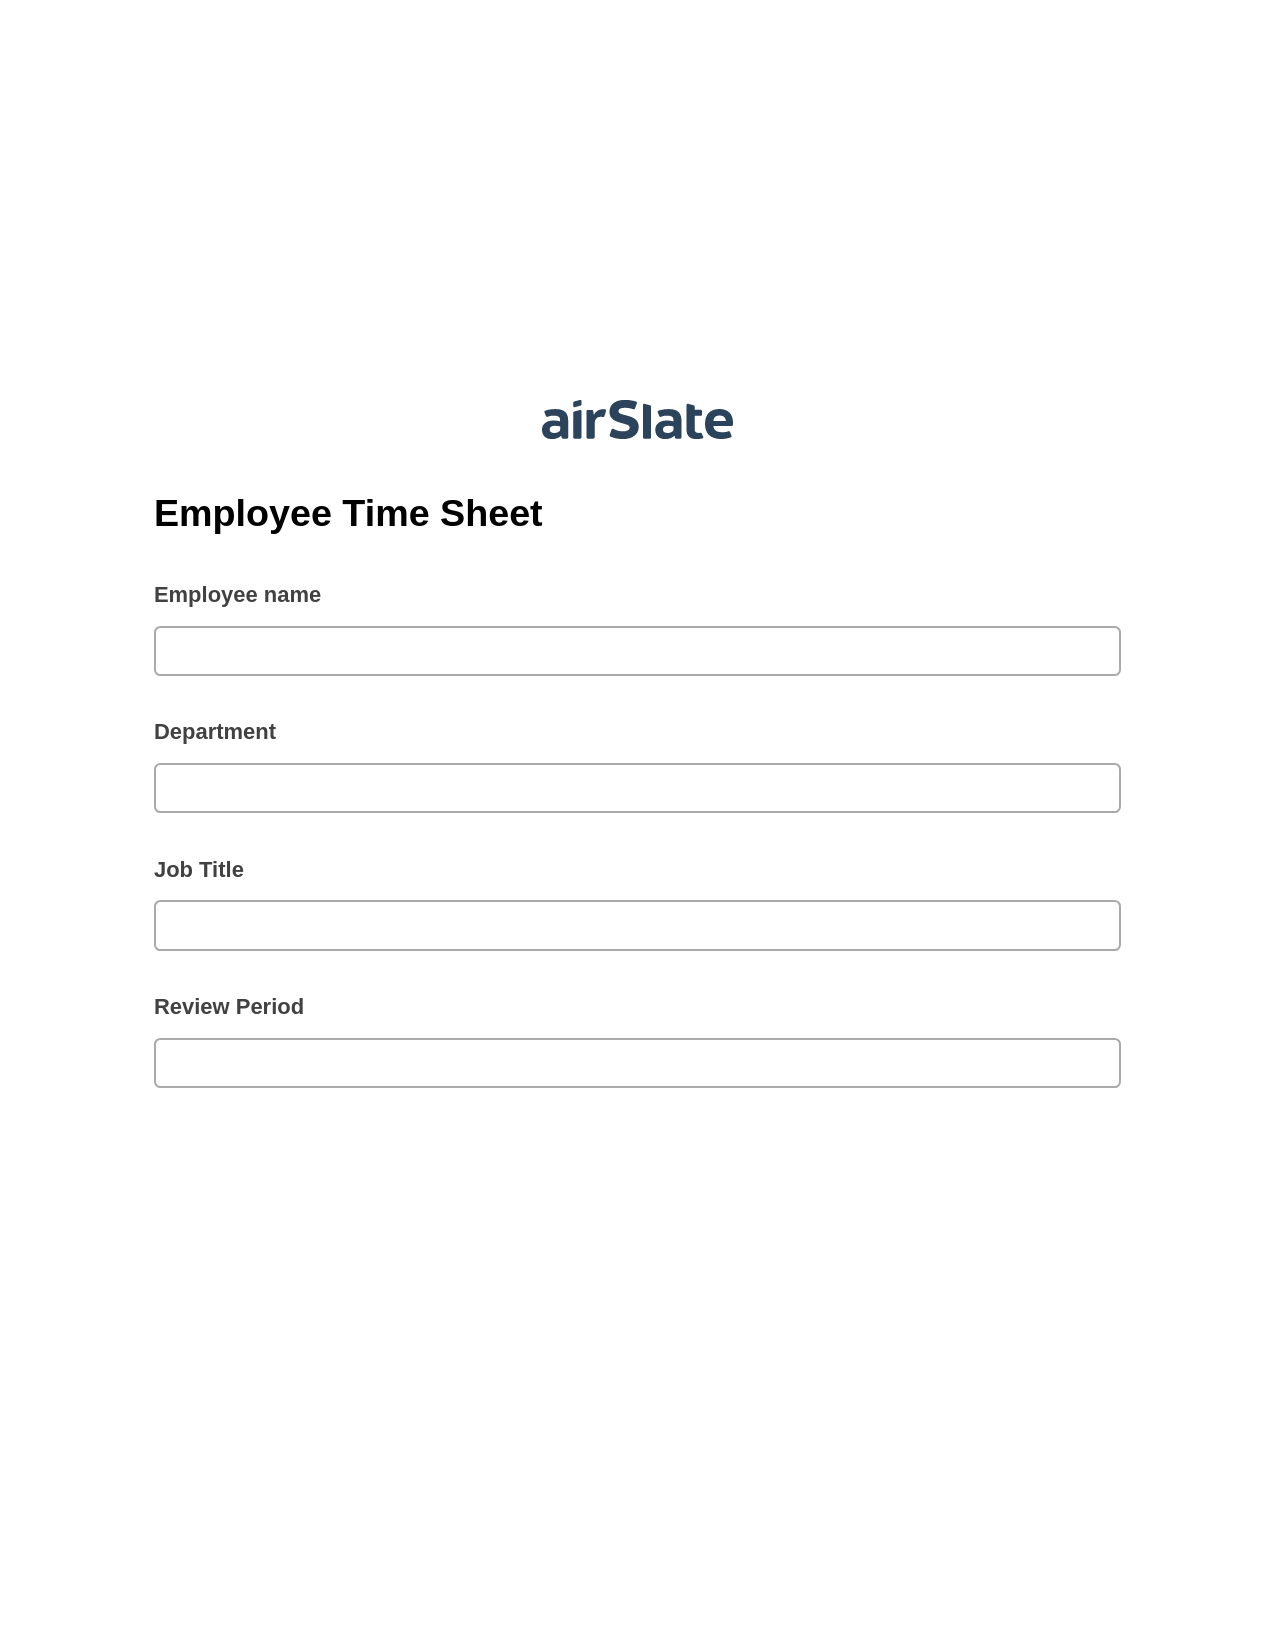 Multirole Employee Time Sheet Pre-fill from Salesforce Records Bot, Create Salesforce Records Bot, Post-finish Document Bot